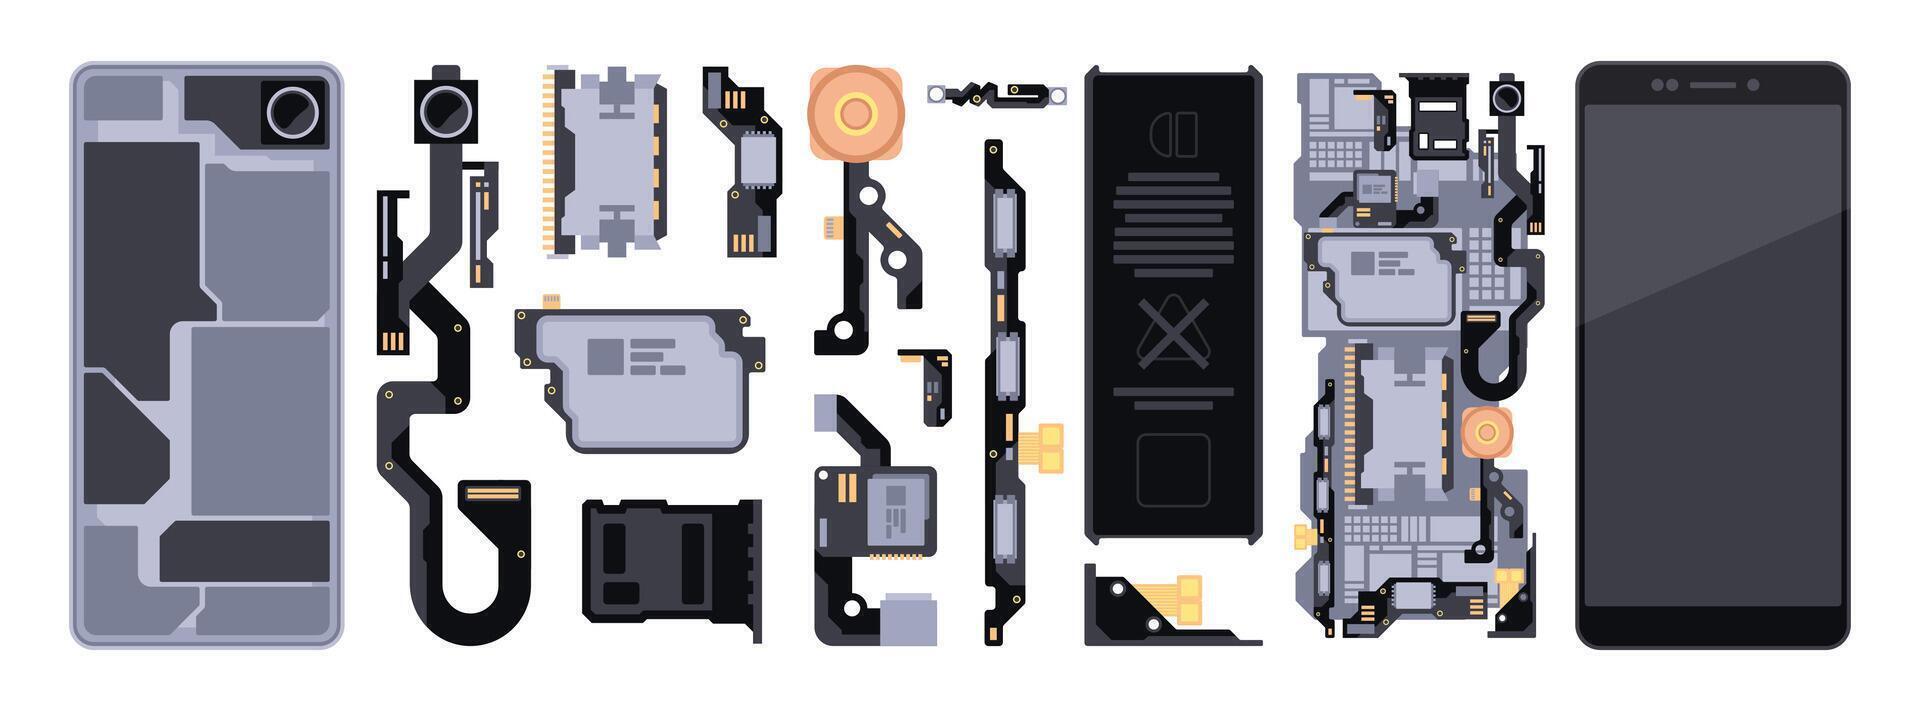 Phone disassembly parts. Smart phone open and closed, mobile device with camera and memory elements, electronic device service. Vector set